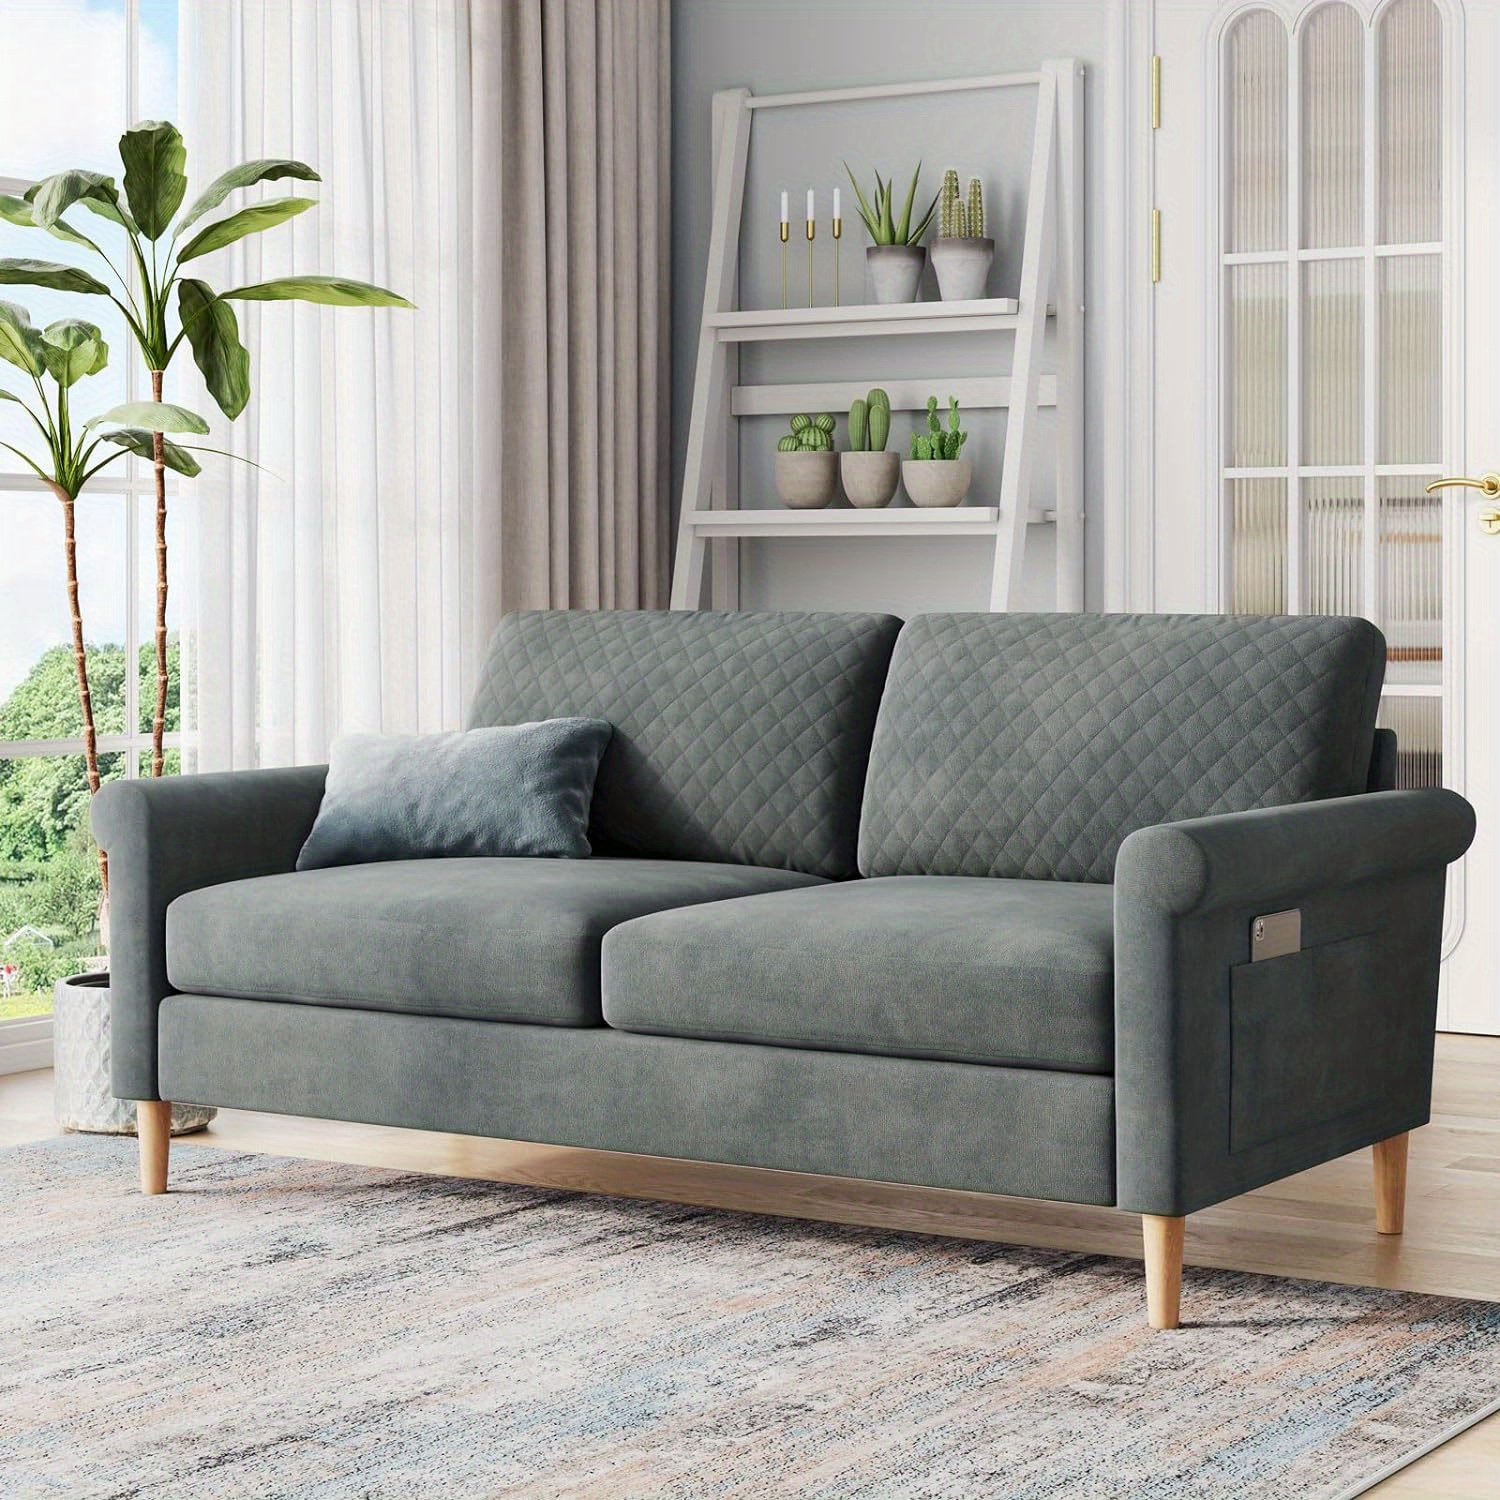 

Mid-century Modern Loveseat Sofa, 2-seater Couch With Foam Cushioning And Pocket Spring, 65.1'' Wide, Hybrid Comfort Design, Ideal For Living Room And Small Spaces - Available In Multiple Colors